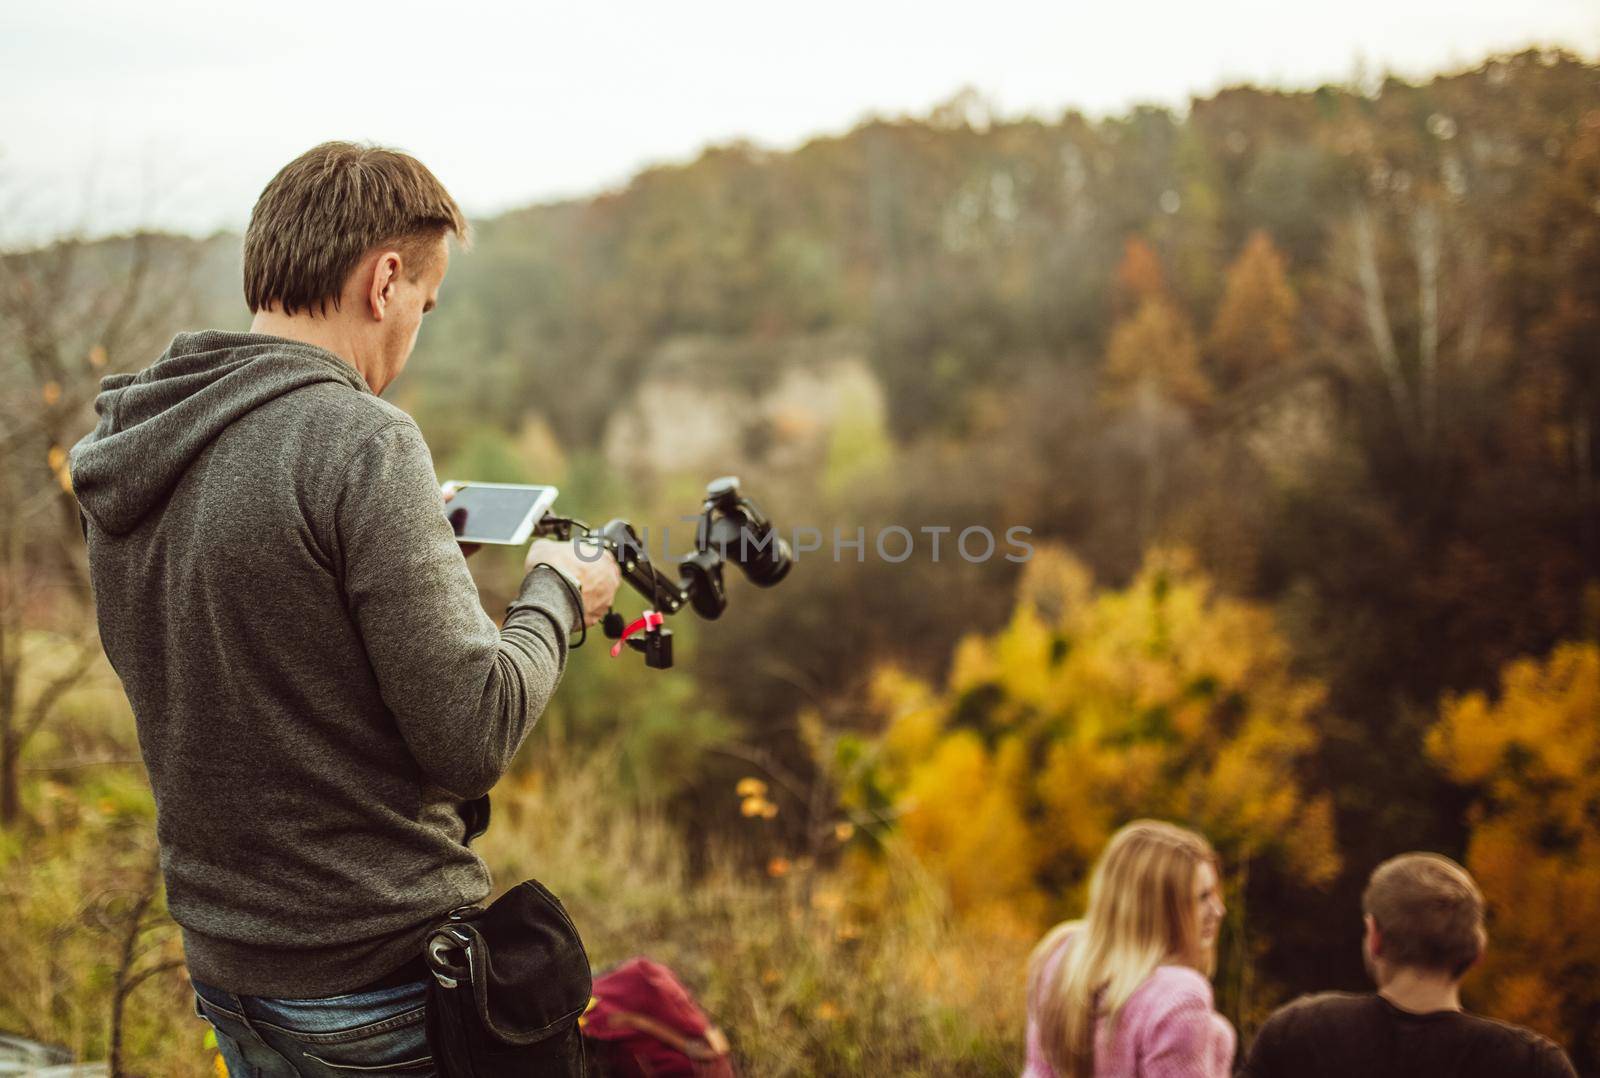 Young man going to shoot couple of tourists in love sitting on top of mountain in Autumn nature. Rear view of cameraman preparing camera on digital stabilizer for shooting photo or video.